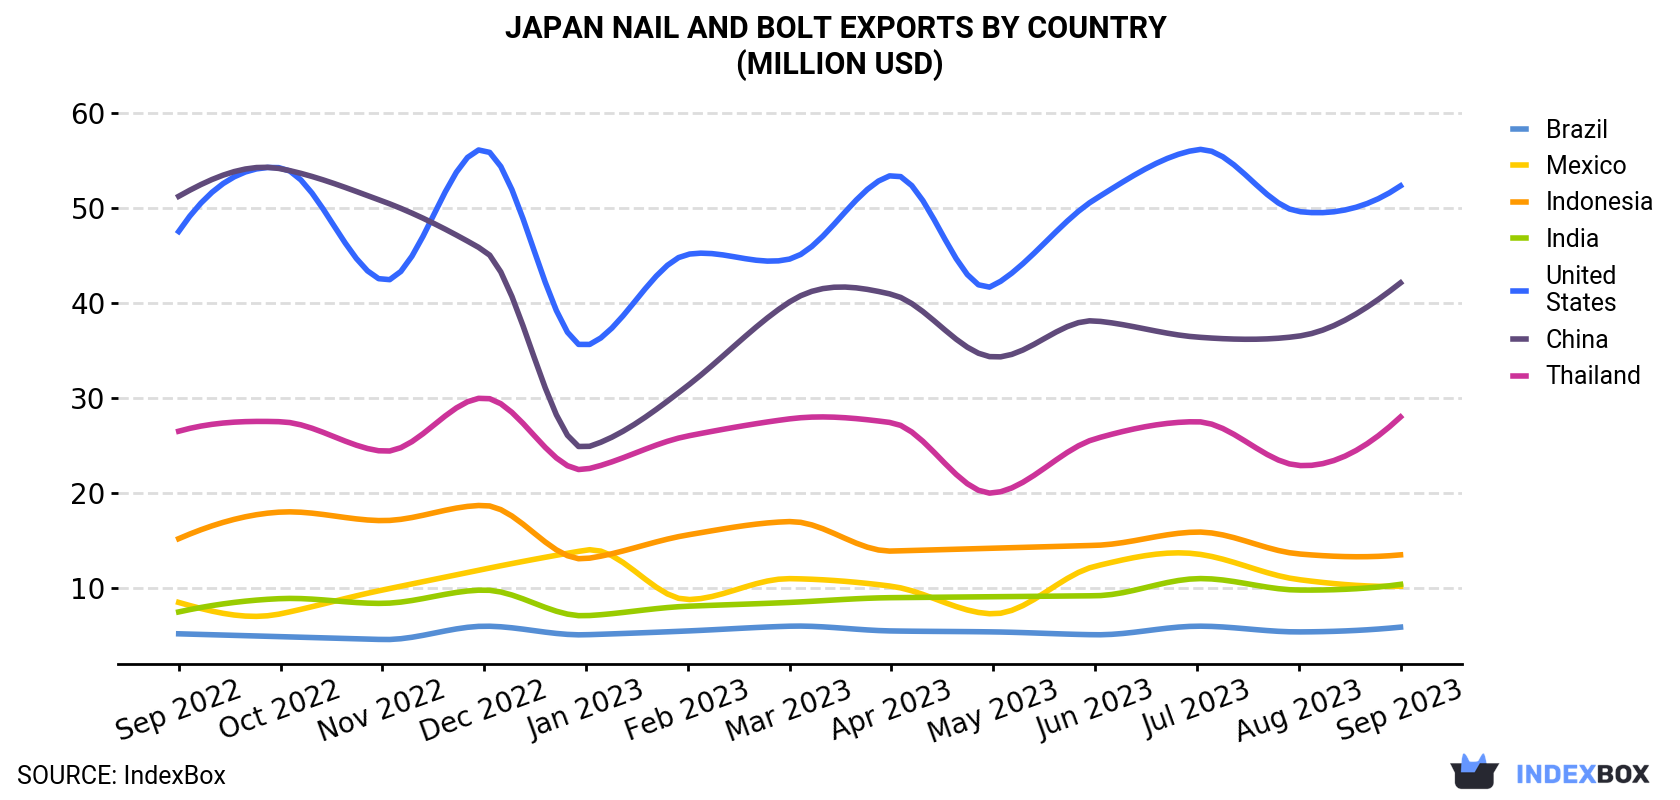 Japan Nail And Bolt Exports By Country (Million USD)